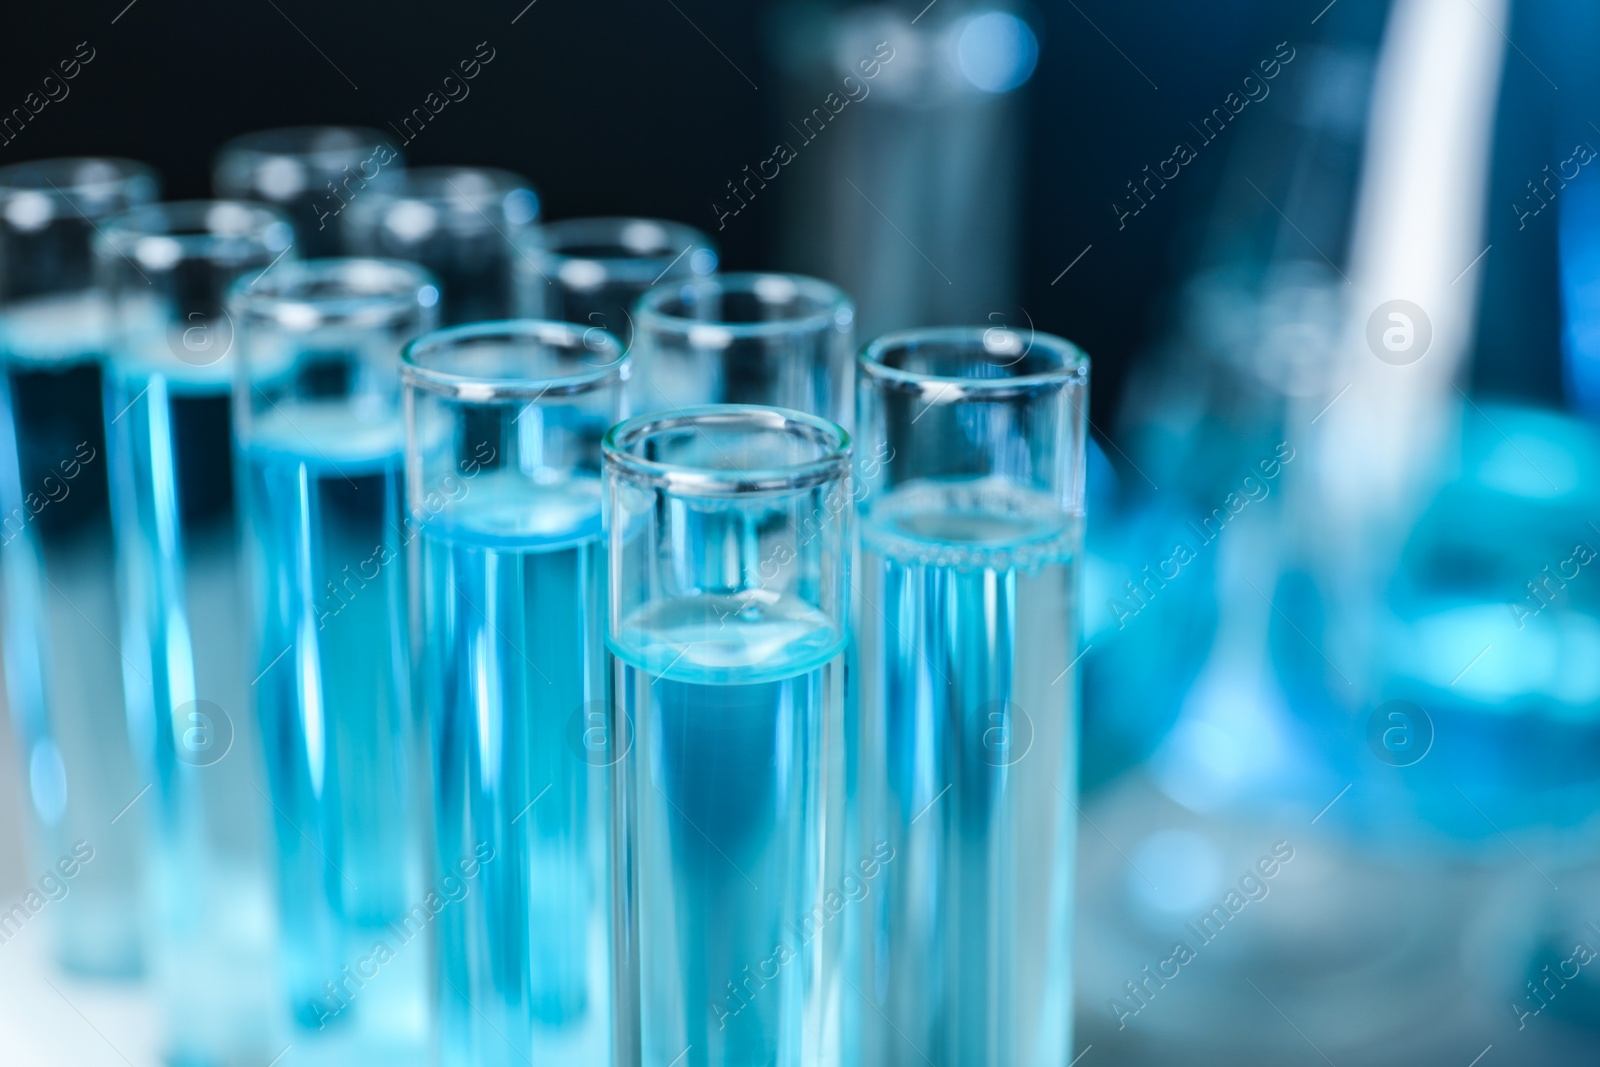 Photo of Test tubes with liquid on blurred background, closeup with space for text. Solution chemistry